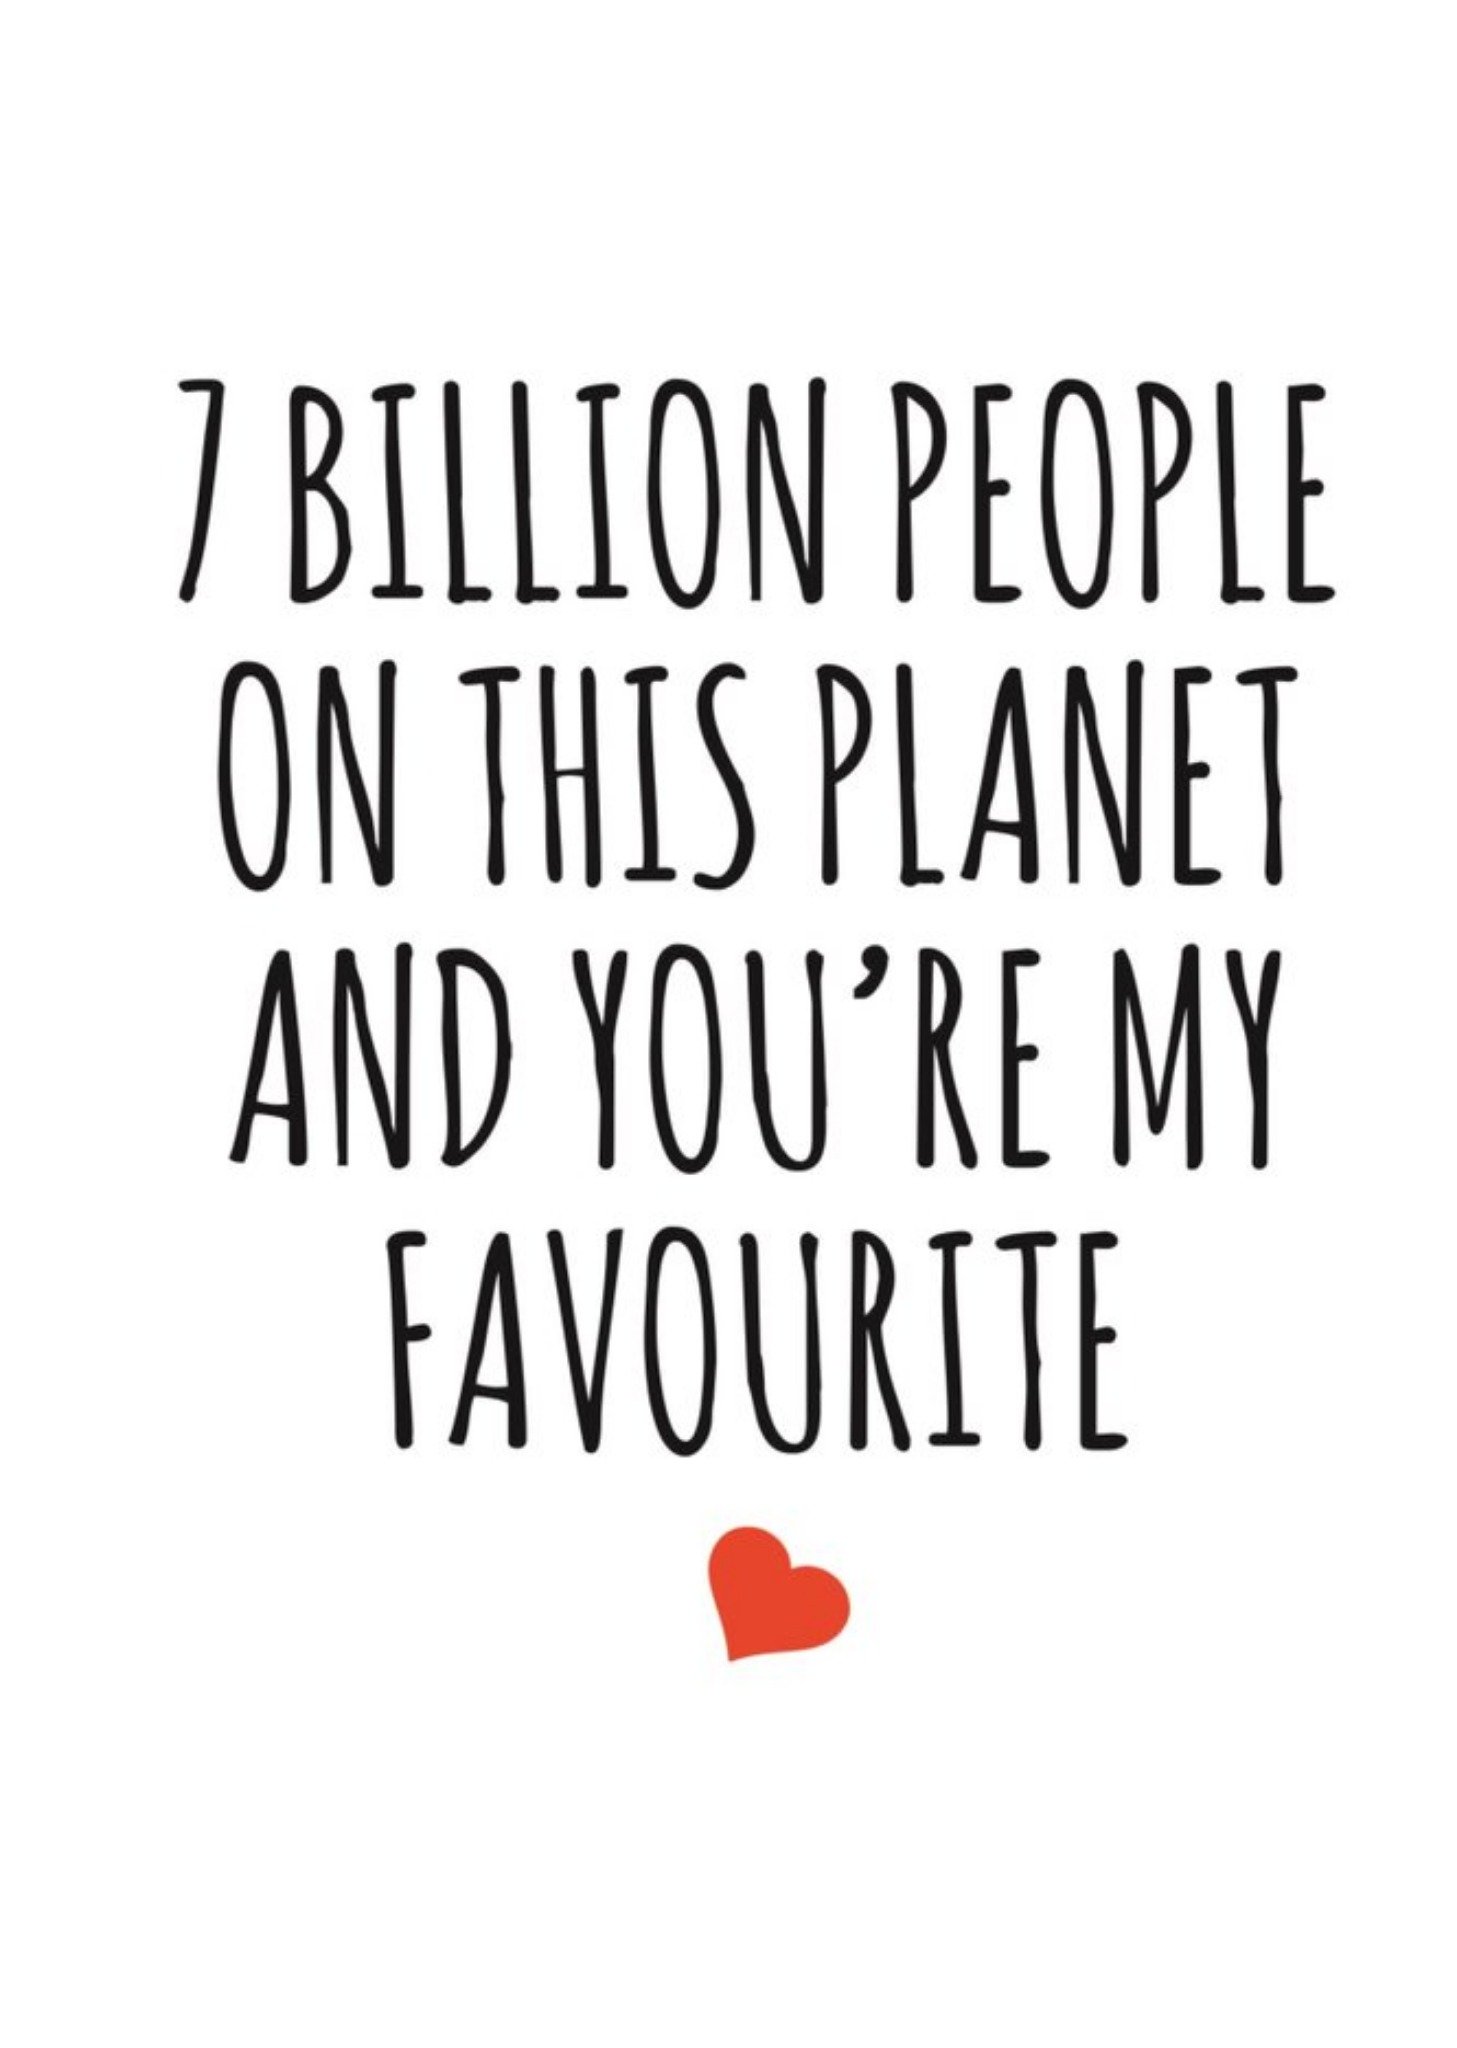 Banter King Typographical 7 Billion People On This Planet And Your My Favourite Valentines Day Card,